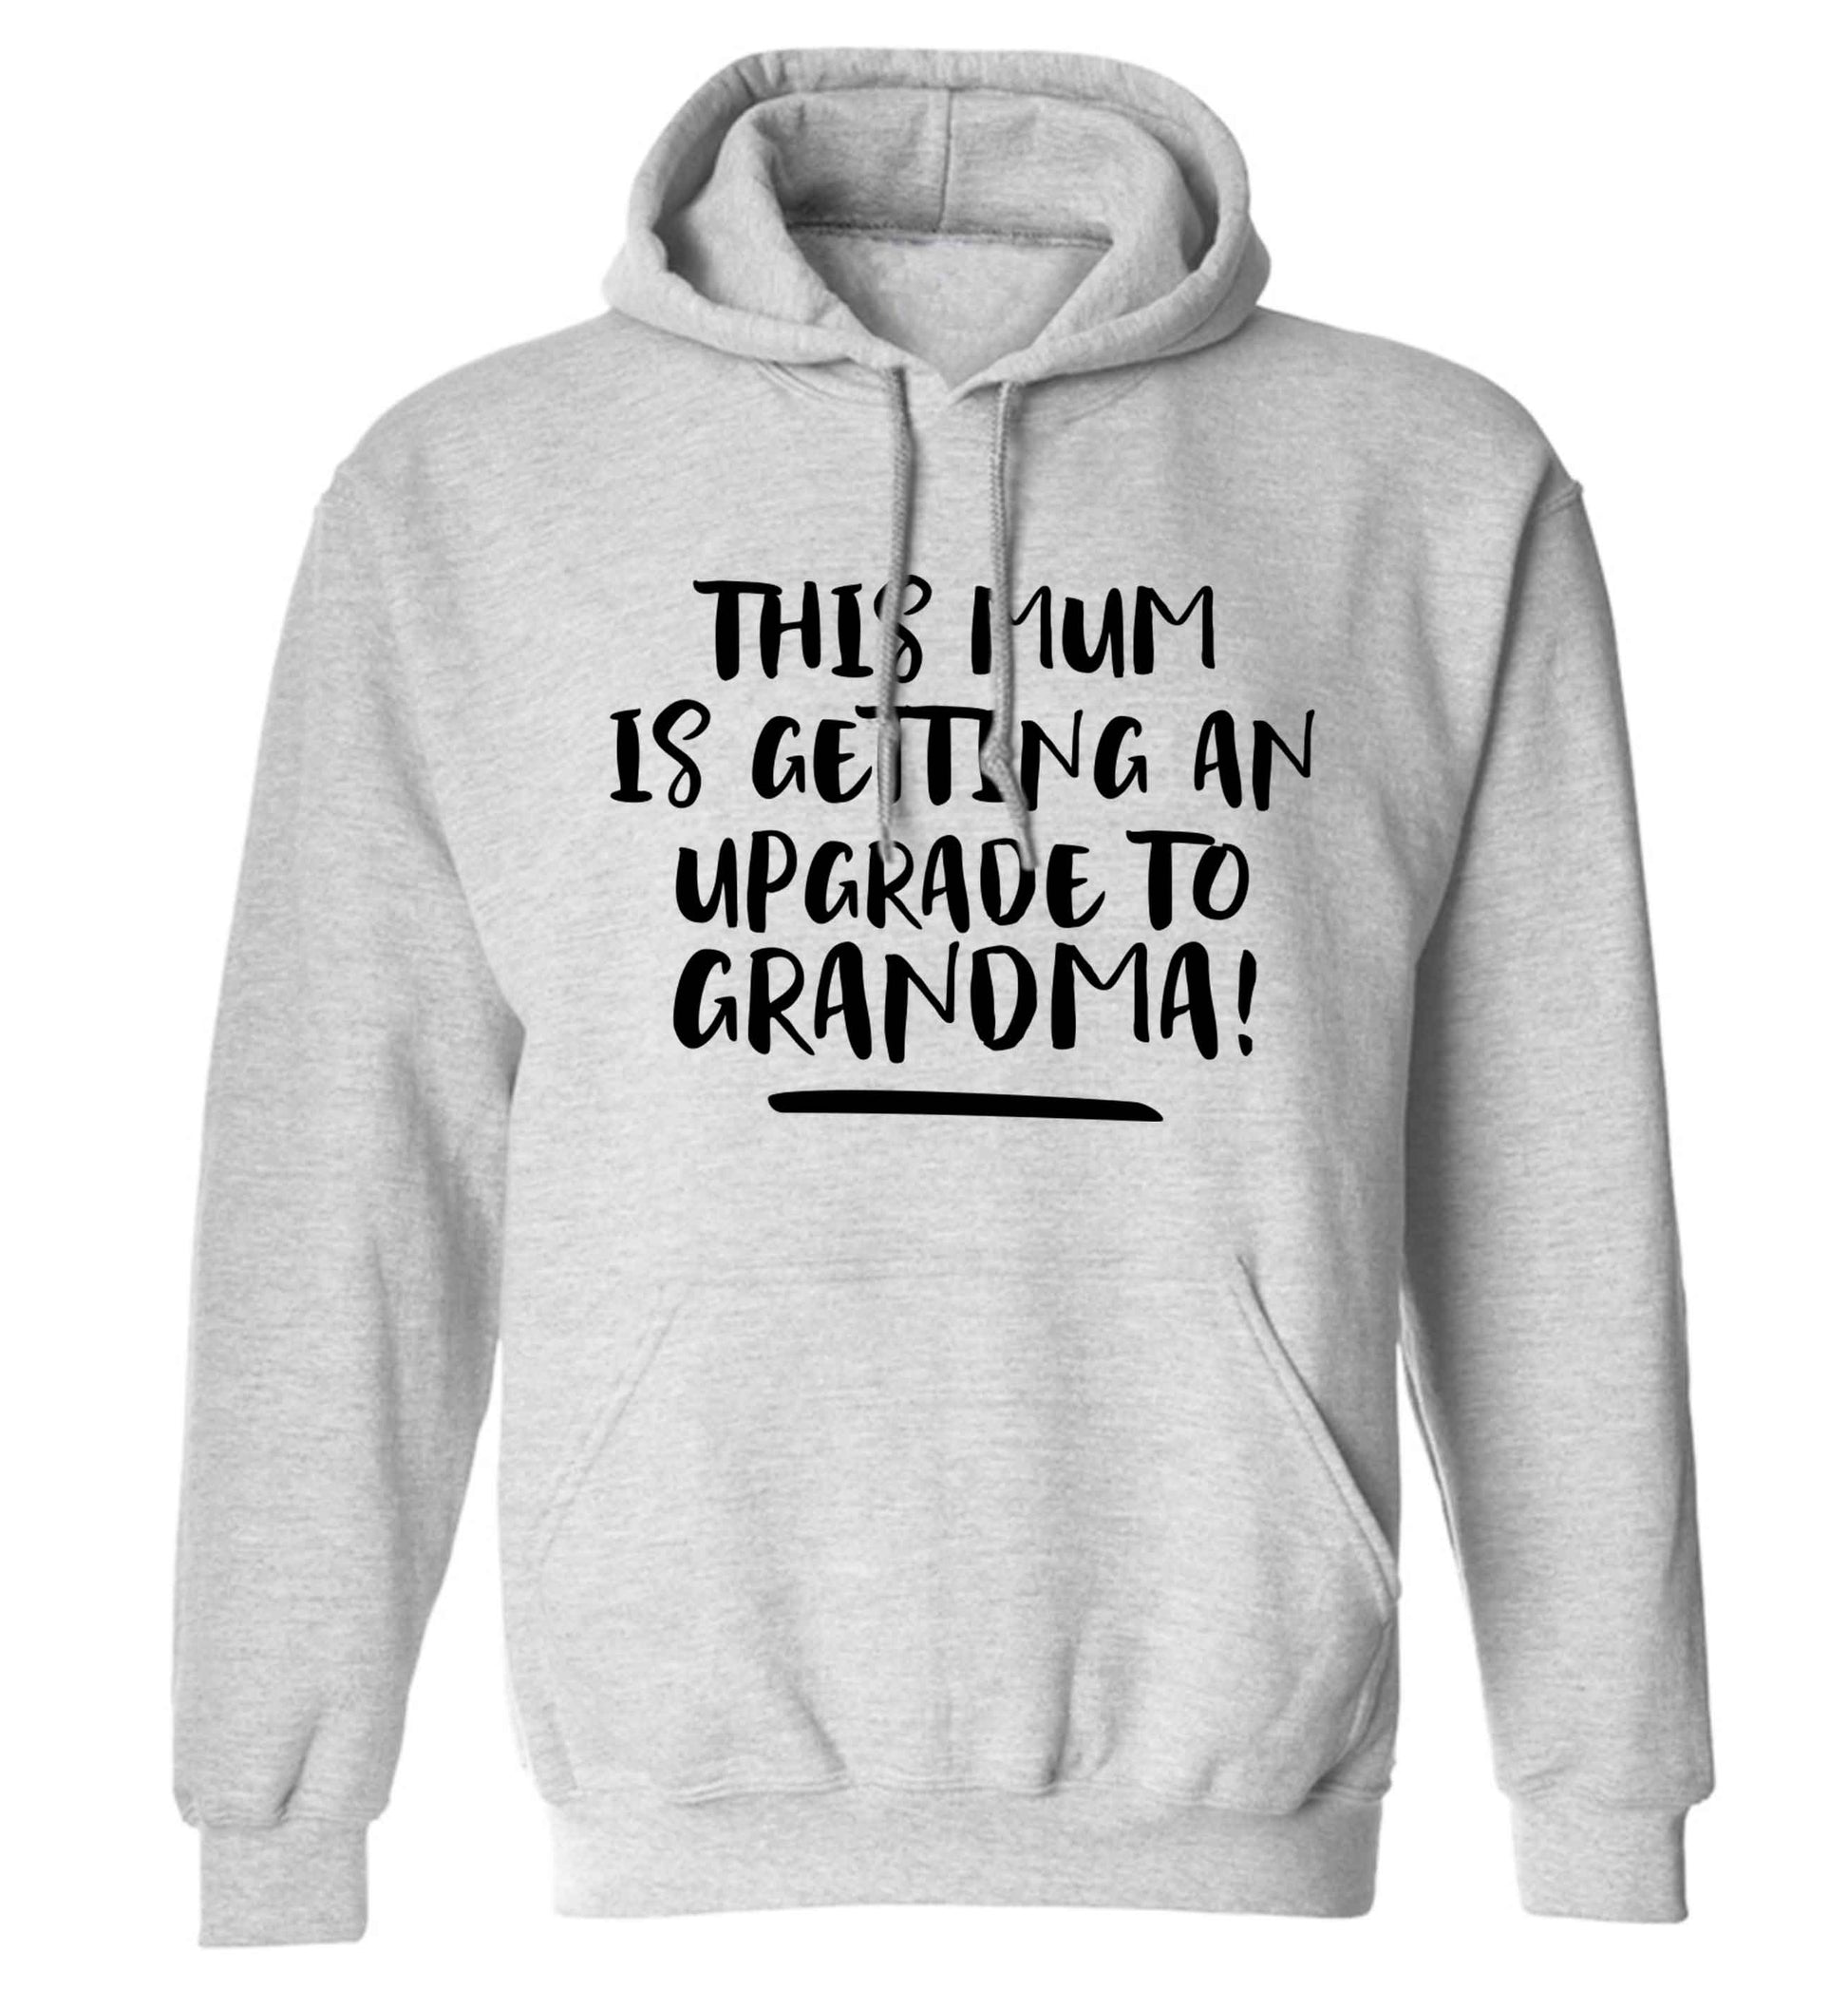 This mum is getting an upgrade to grandma! adults unisex grey hoodie 2XL